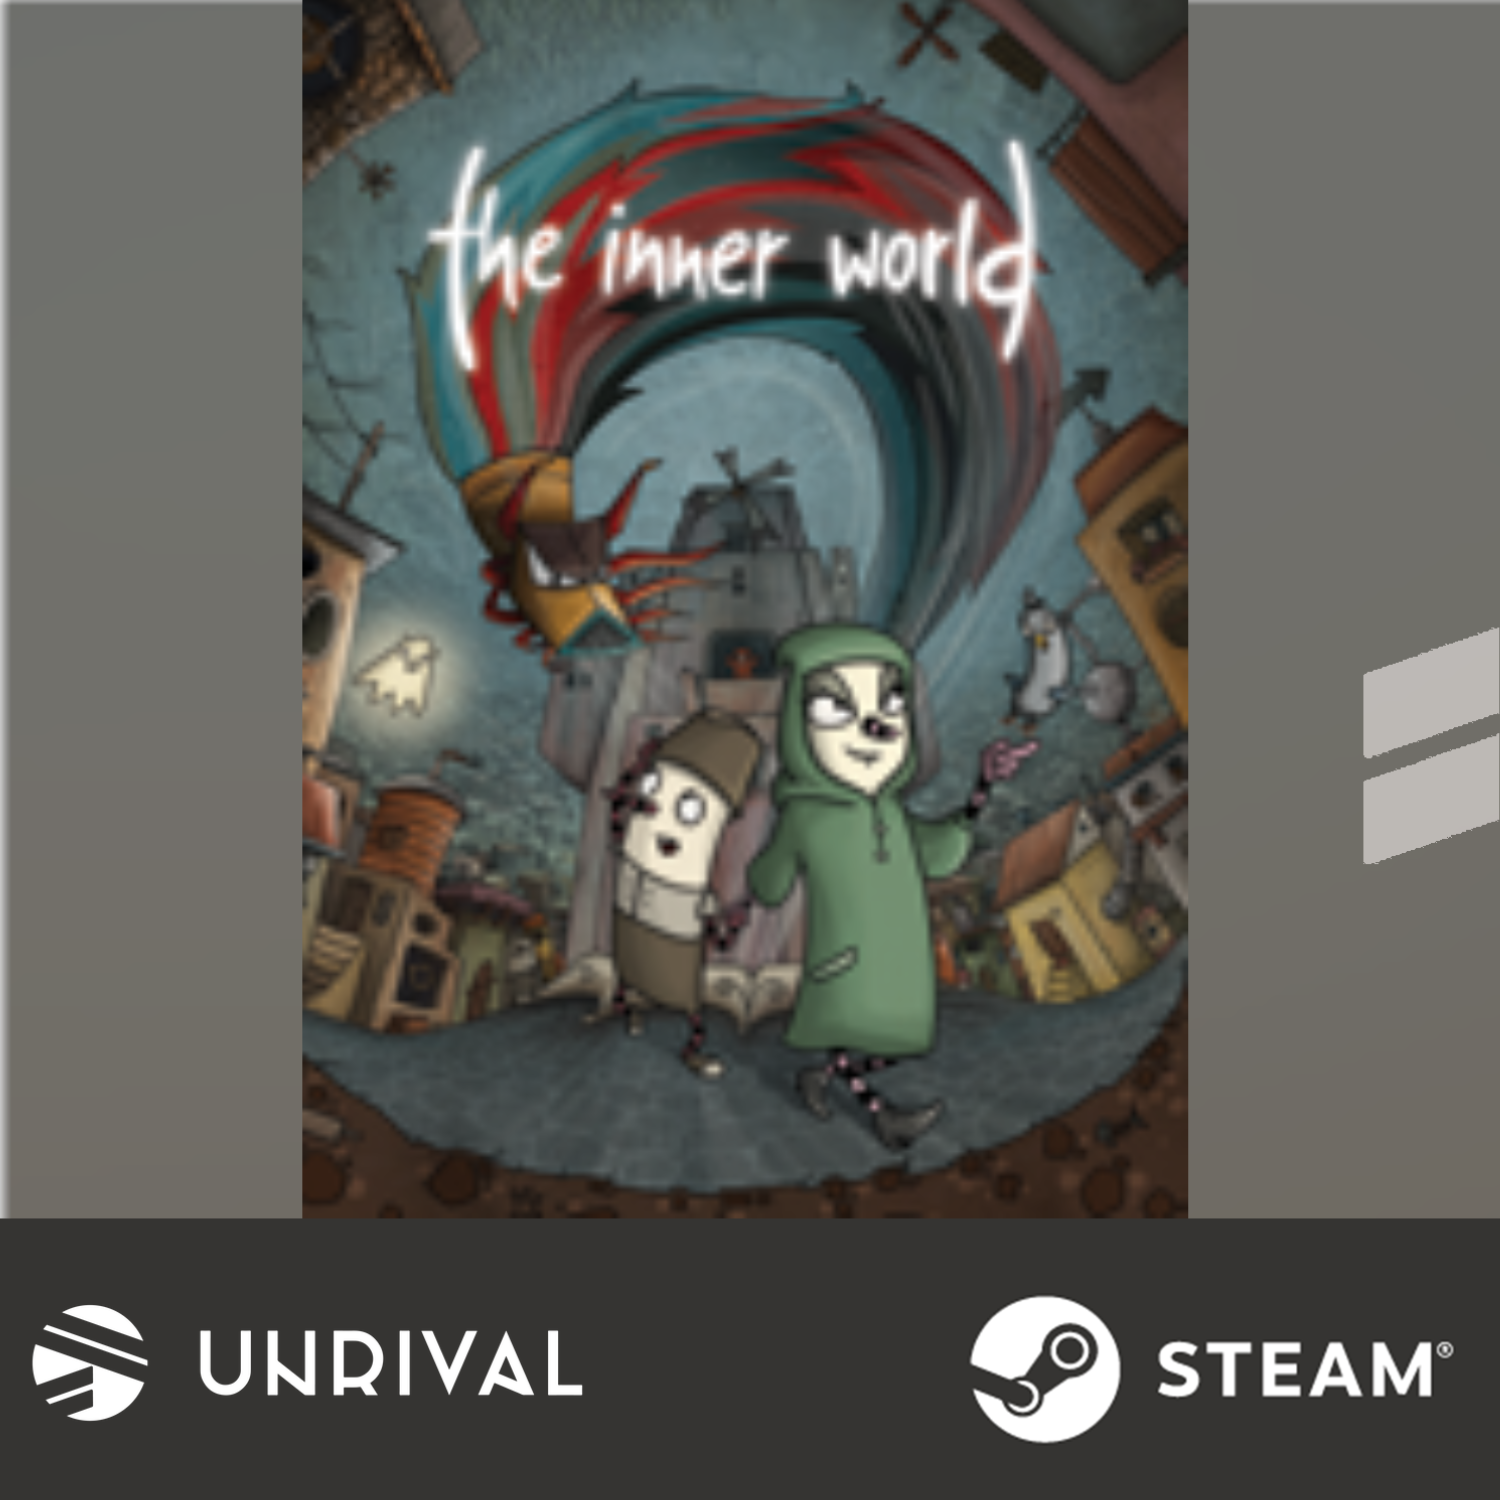 [Hot Sale] The Inner World PC Digital Download Game (Single Player) - Unrival